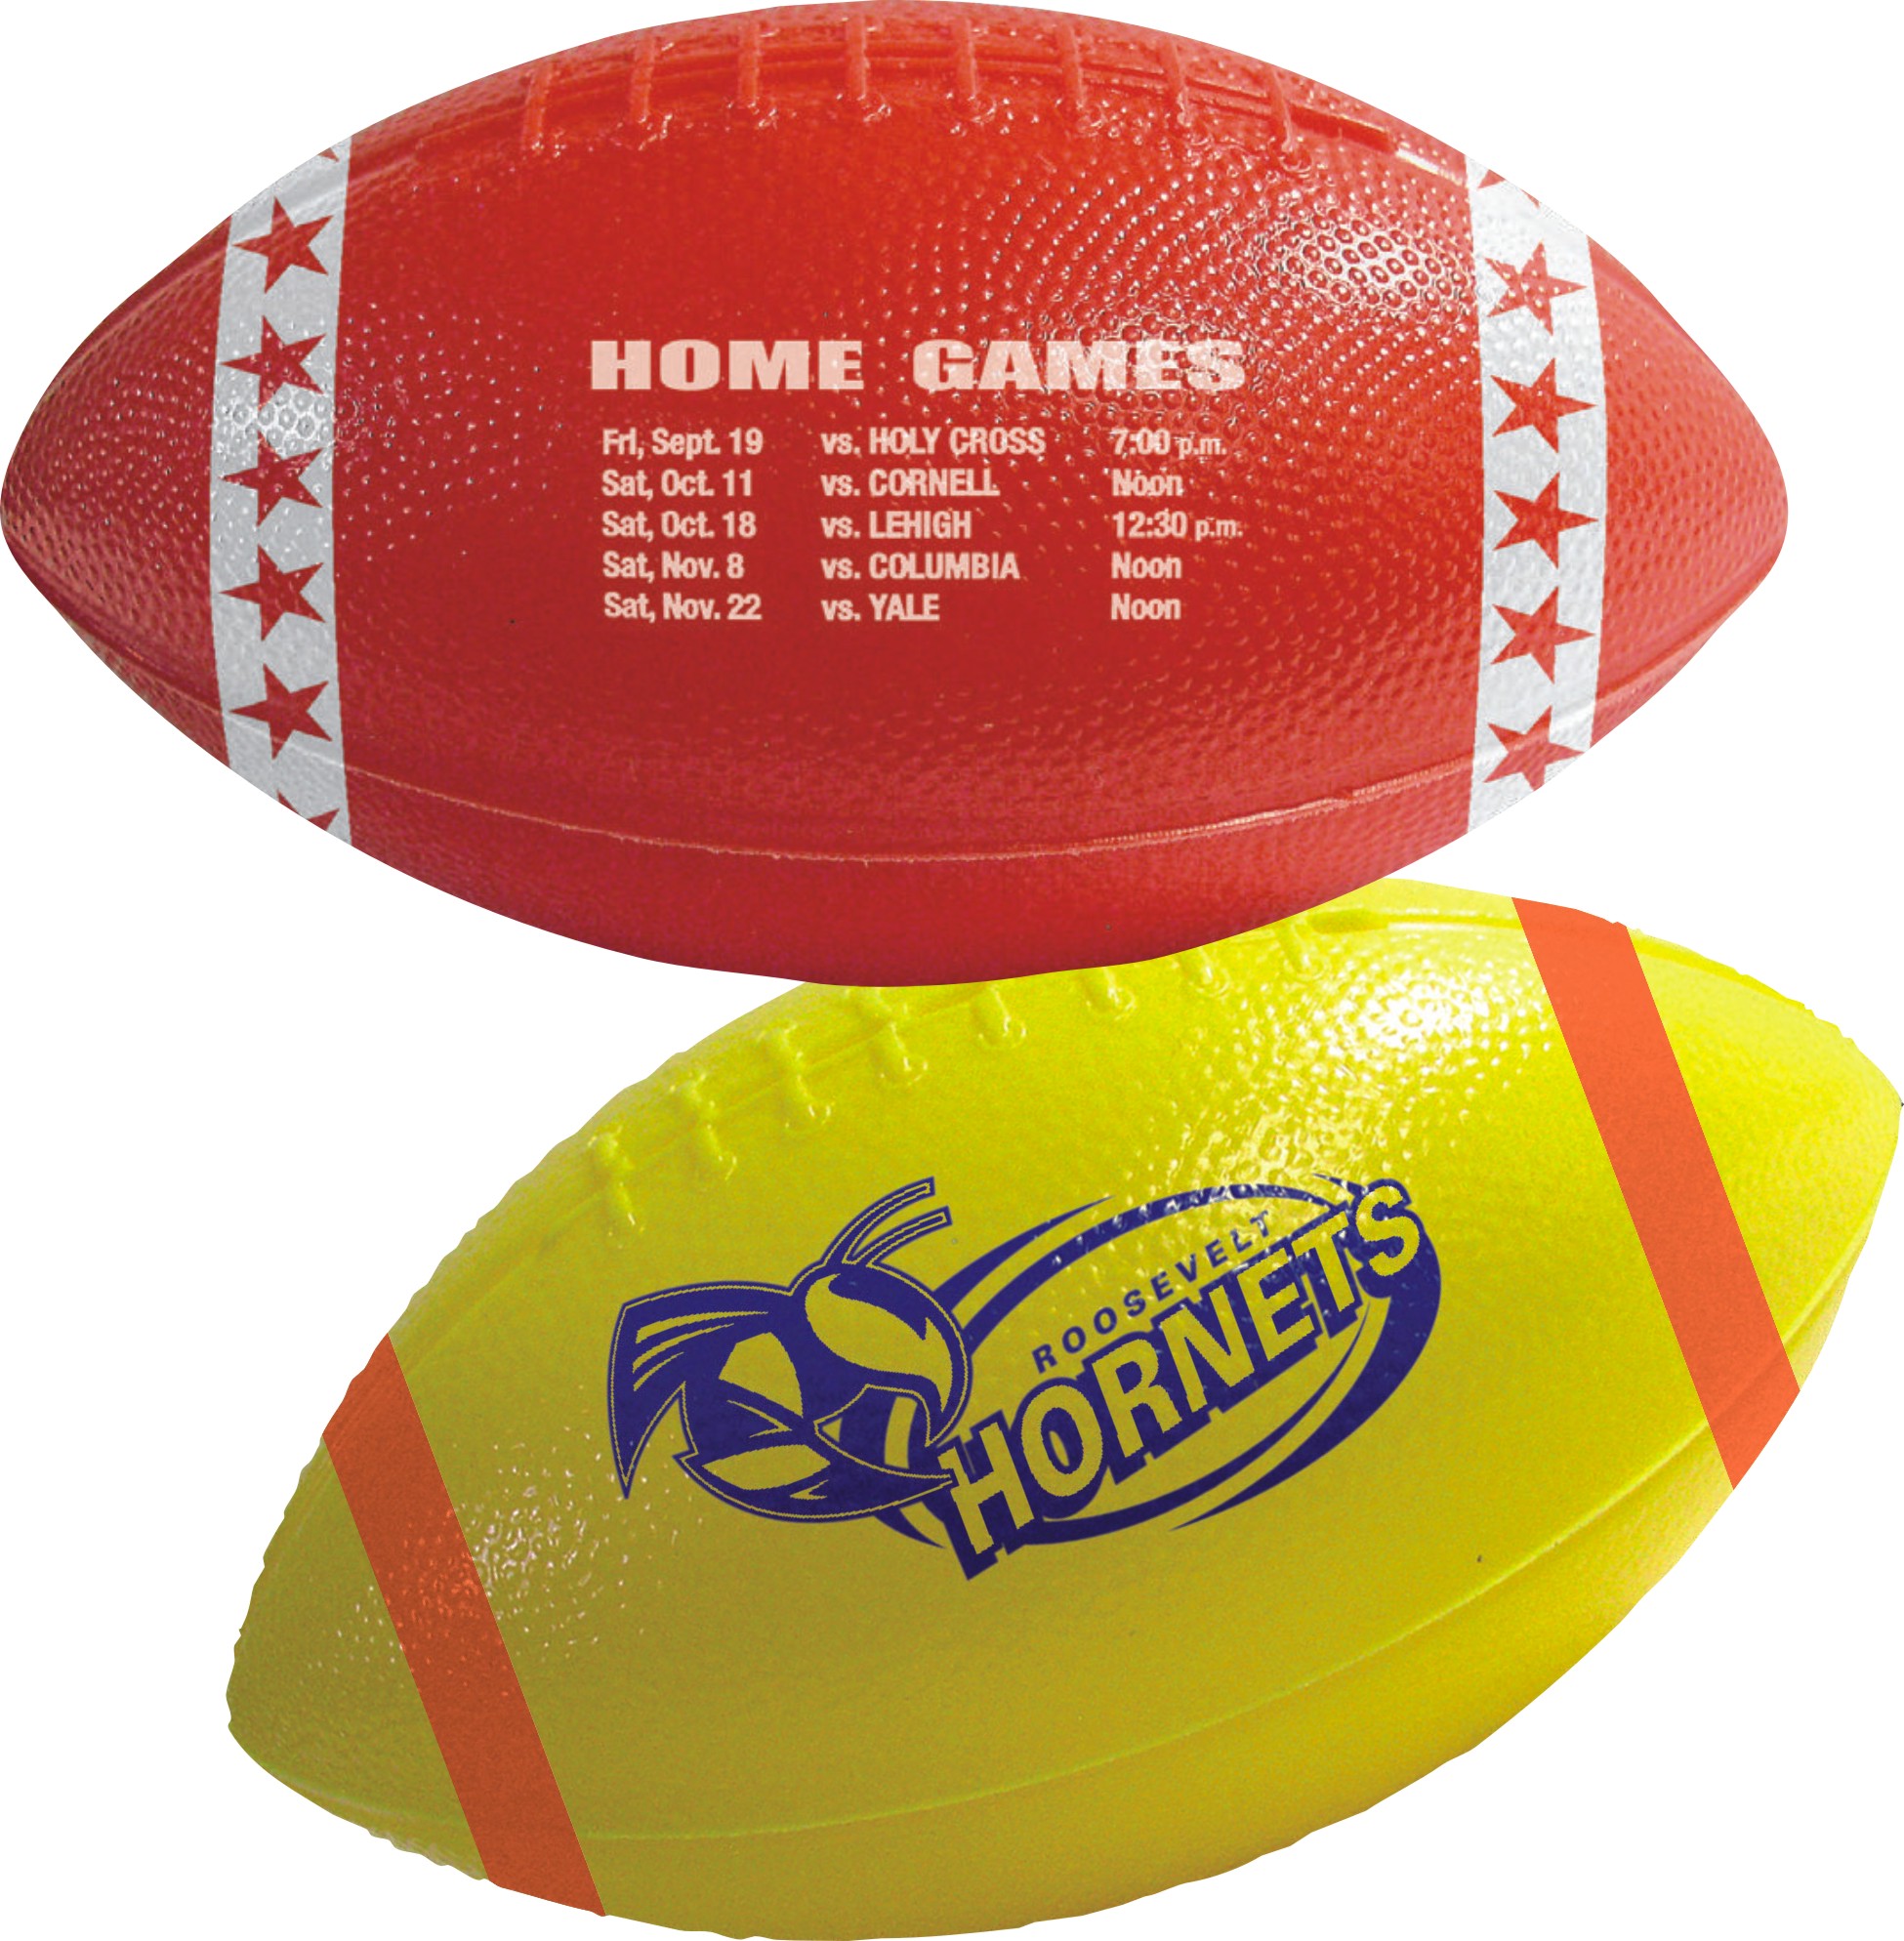 CURRENTLY UNAVAILABLE......... 6" Mini Plastic Footballs - With Stripes